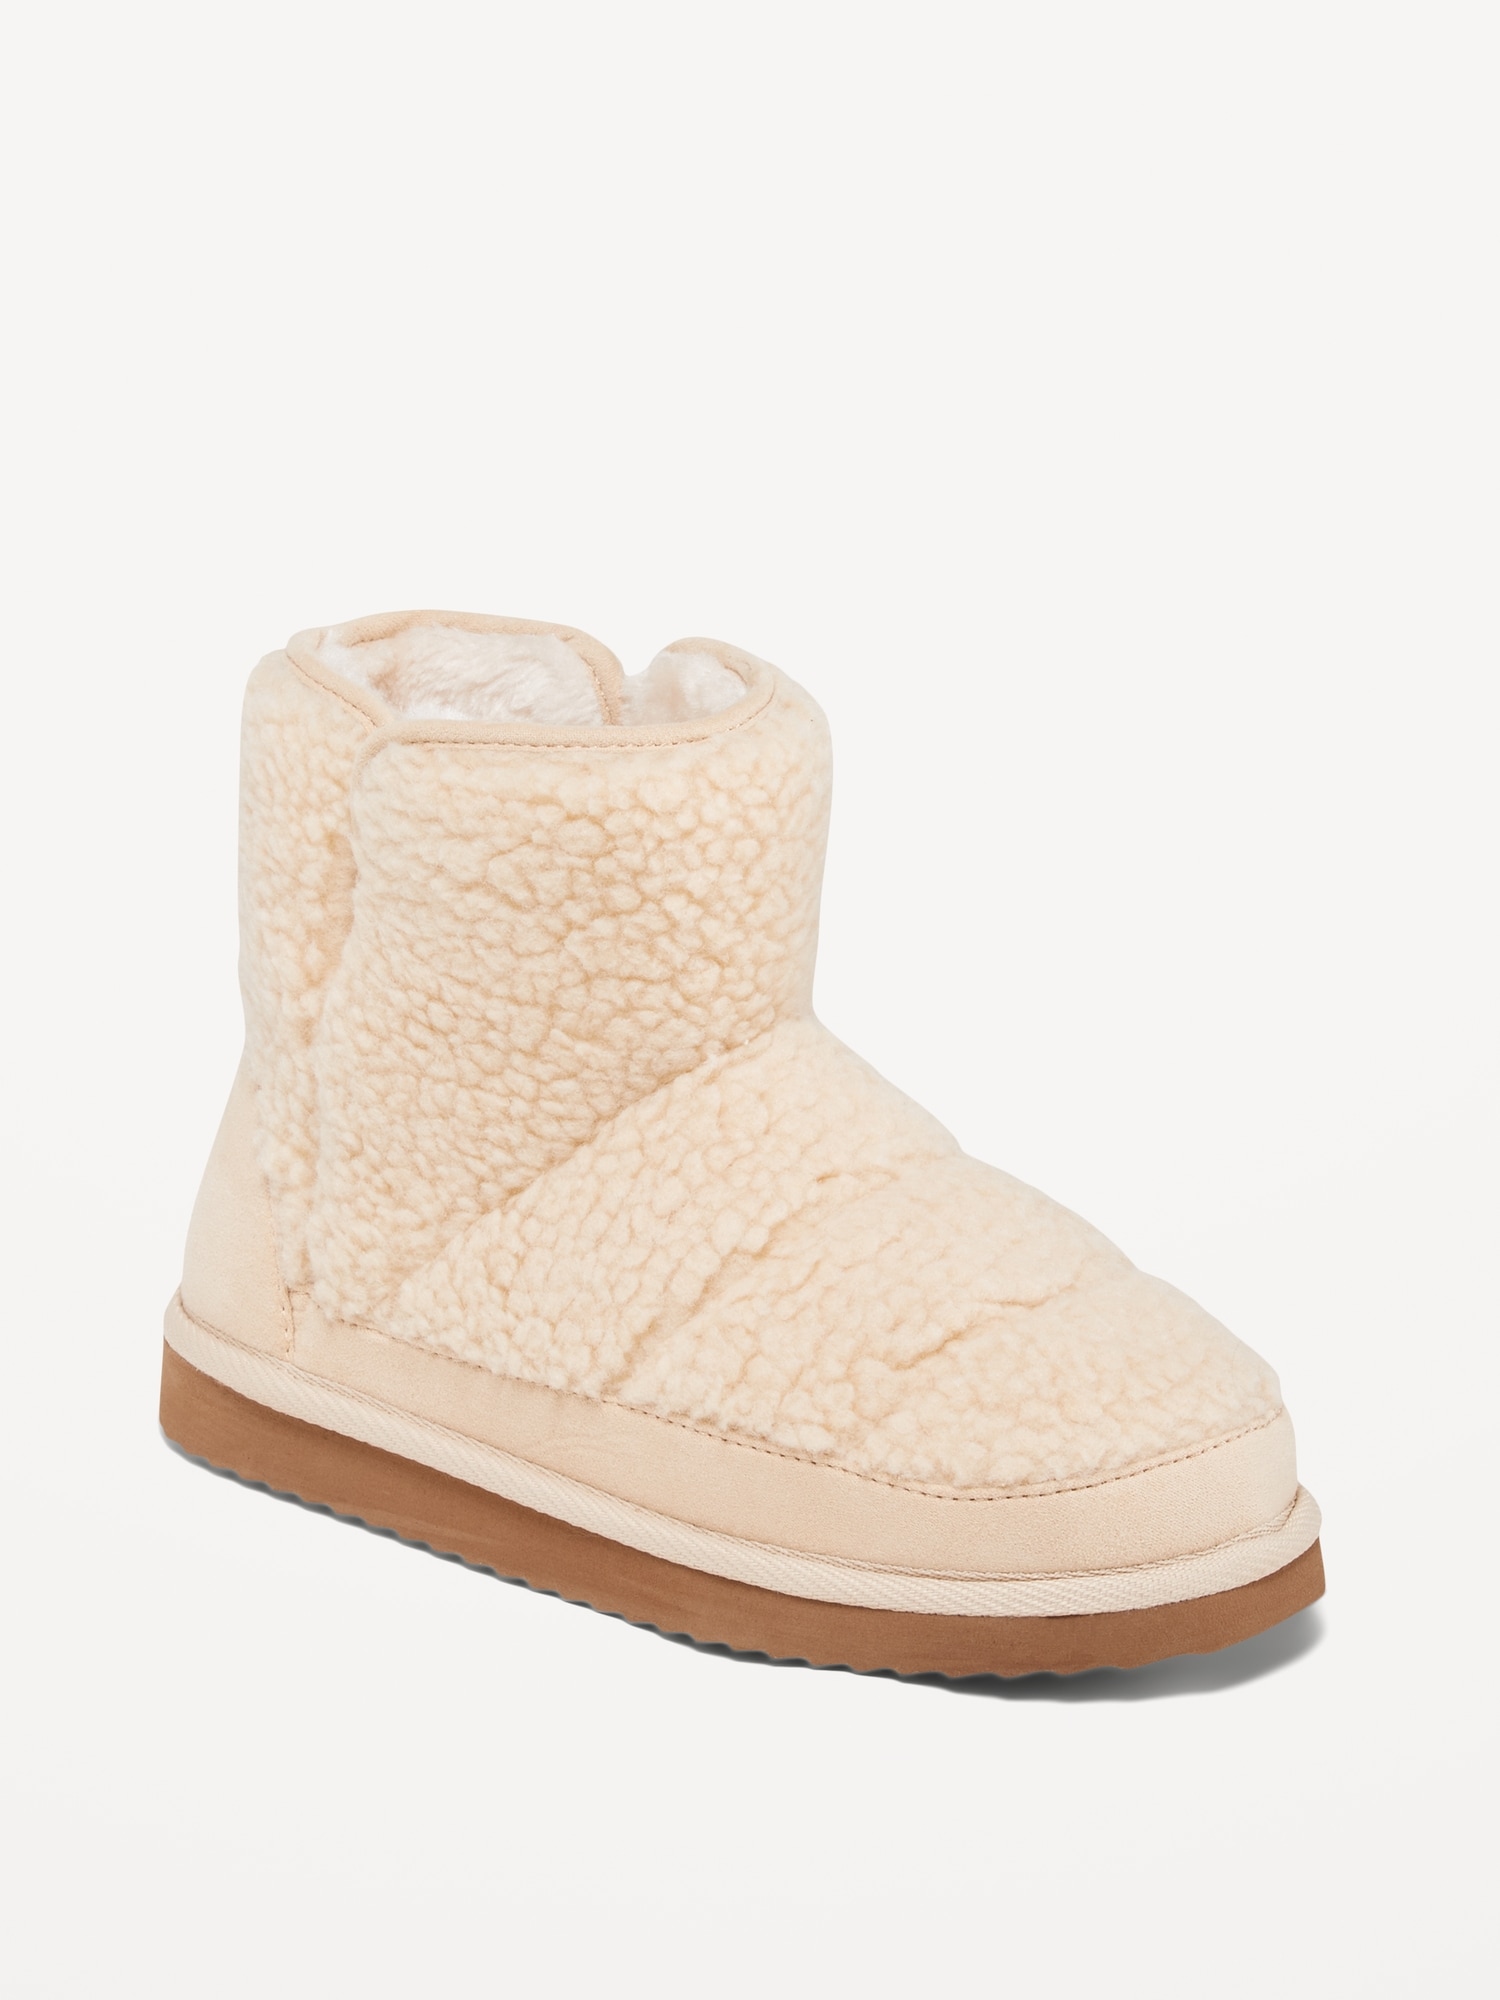 Oldnavy Cozy Sherpa Faux-Fur Lined Boots for Girls